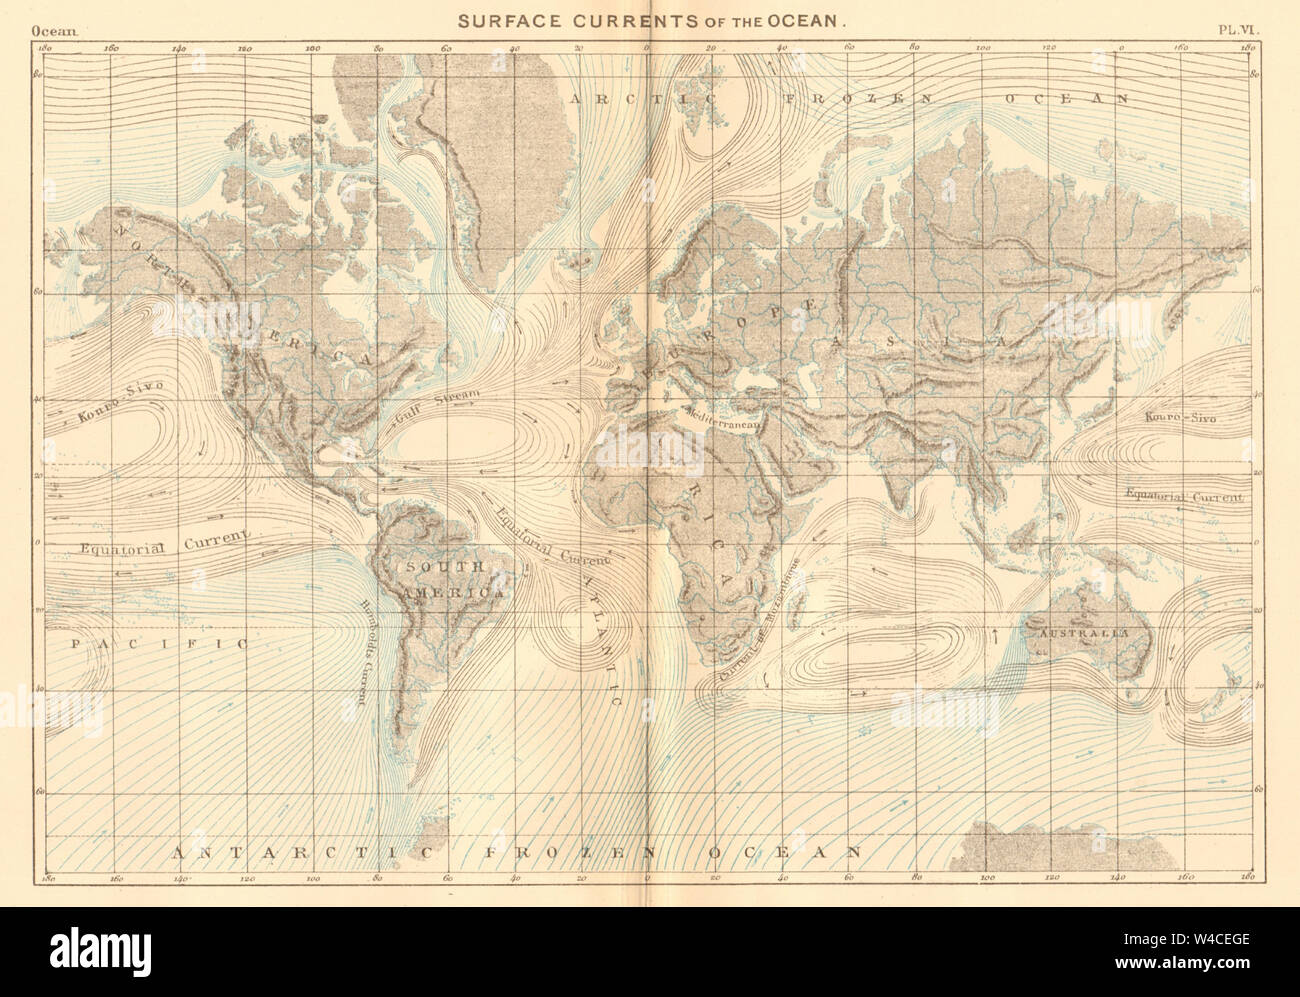 Surface of Currents of the Ocean. World 1886 old antique map plan chart Stock Photo